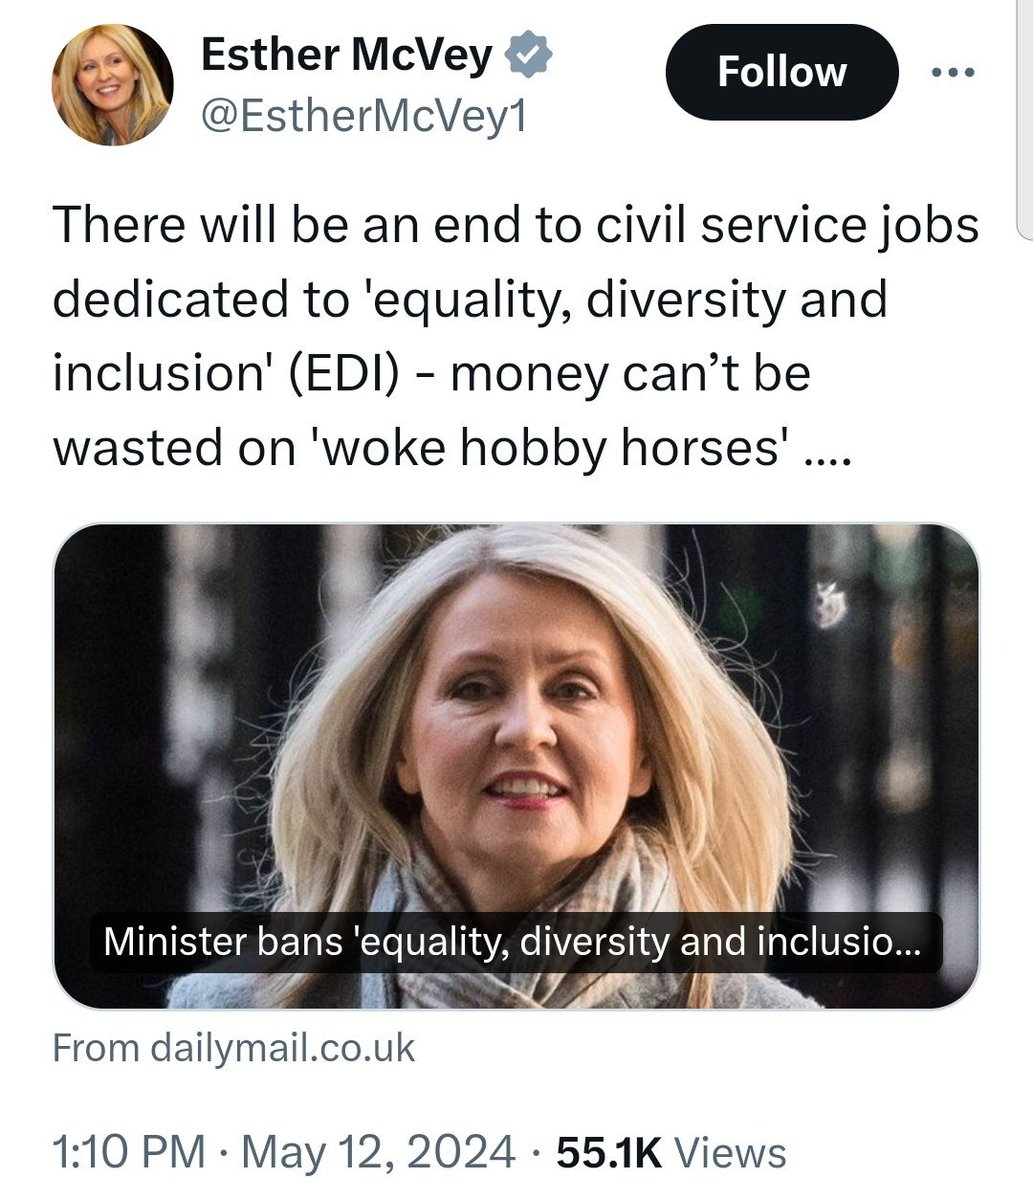 Someone has to pay for Tory corruption and it will be us. Working class kids won't be included in the civil service, Black people won't get on because of a structural lack of diversity, and women will suffer unequal treatment. And the rest of us - who will continue to be ruled by…